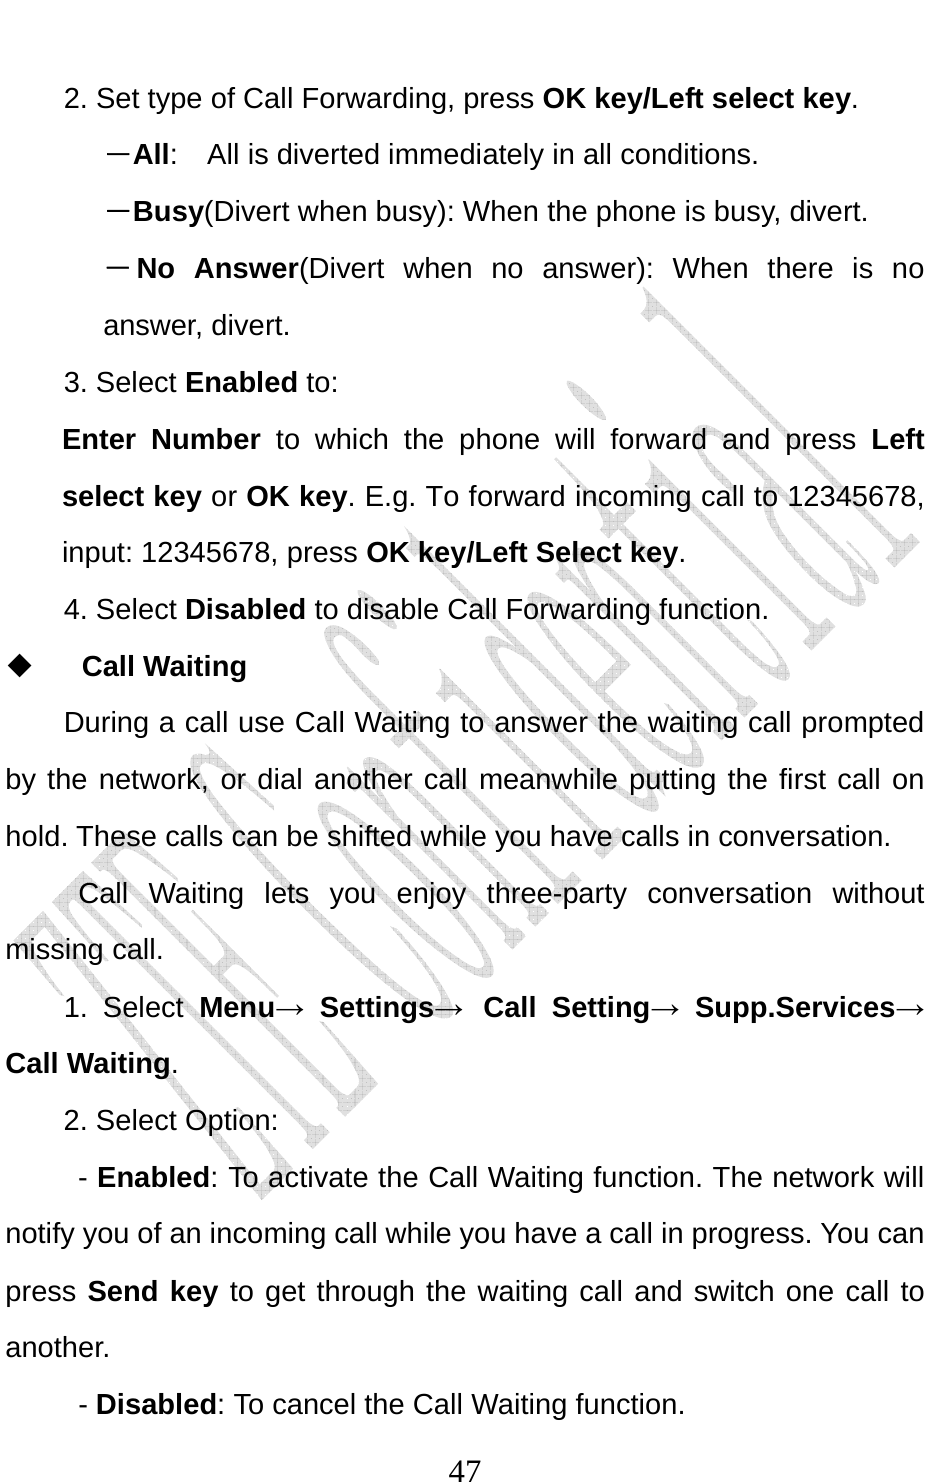                              472. Set type of Call Forwarding, press OK key/Left select key. －All:  All is diverted immediately in all conditions. －Busy(Divert when busy): When the phone is busy, divert. －No Answer(Divert when no answer): When there is no answer, divert.  3. Select Enabled to:  Enter Number to which the phone will forward and press Left select key or OK key. E.g. To forward incoming call to 12345678, input: 12345678, press OK key/Left Select key. 4. Select Disabled to disable Call Forwarding function.  Call Waiting   During a call use Call Waiting to answer the waiting call prompted by the network, or dial another call meanwhile putting the first call on hold. These calls can be shifted while you have calls in conversation.  Call Waiting lets you enjoy three-party conversation without missing call. 1. Select Menu→ Settings→ Call Setting→ Supp.Services→ Call Waiting. 2. Select Option: - Enabled: To activate the Call Waiting function. The network will notify you of an incoming call while you have a call in progress. You can press Send key to get through the waiting call and switch one call to another.  - Disabled: To cancel the Call Waiting function. 